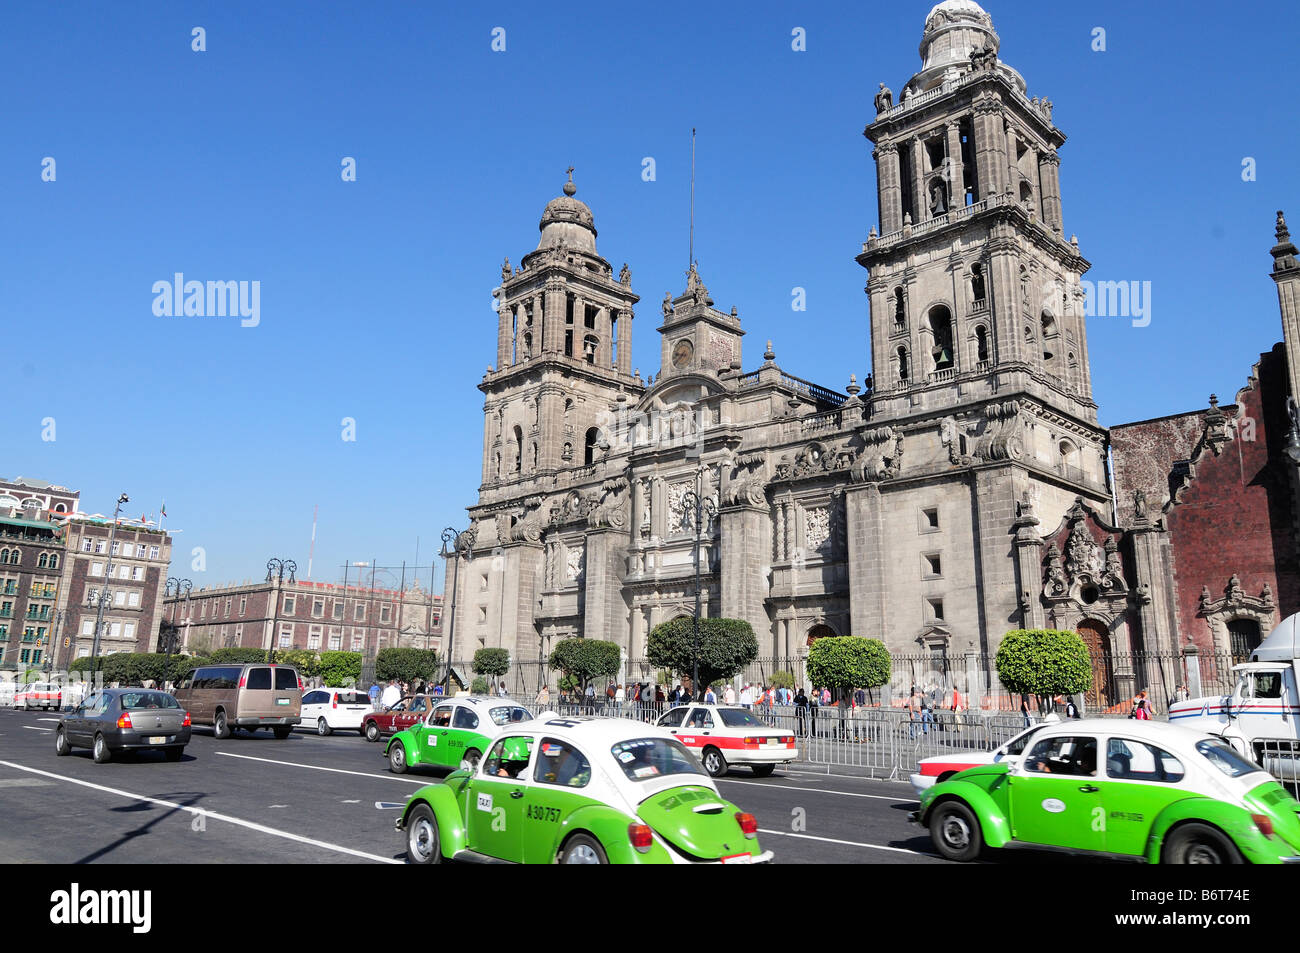 Traffic in front of Catedral Metropolitana on Zocalo, Mexico City Stock Photo